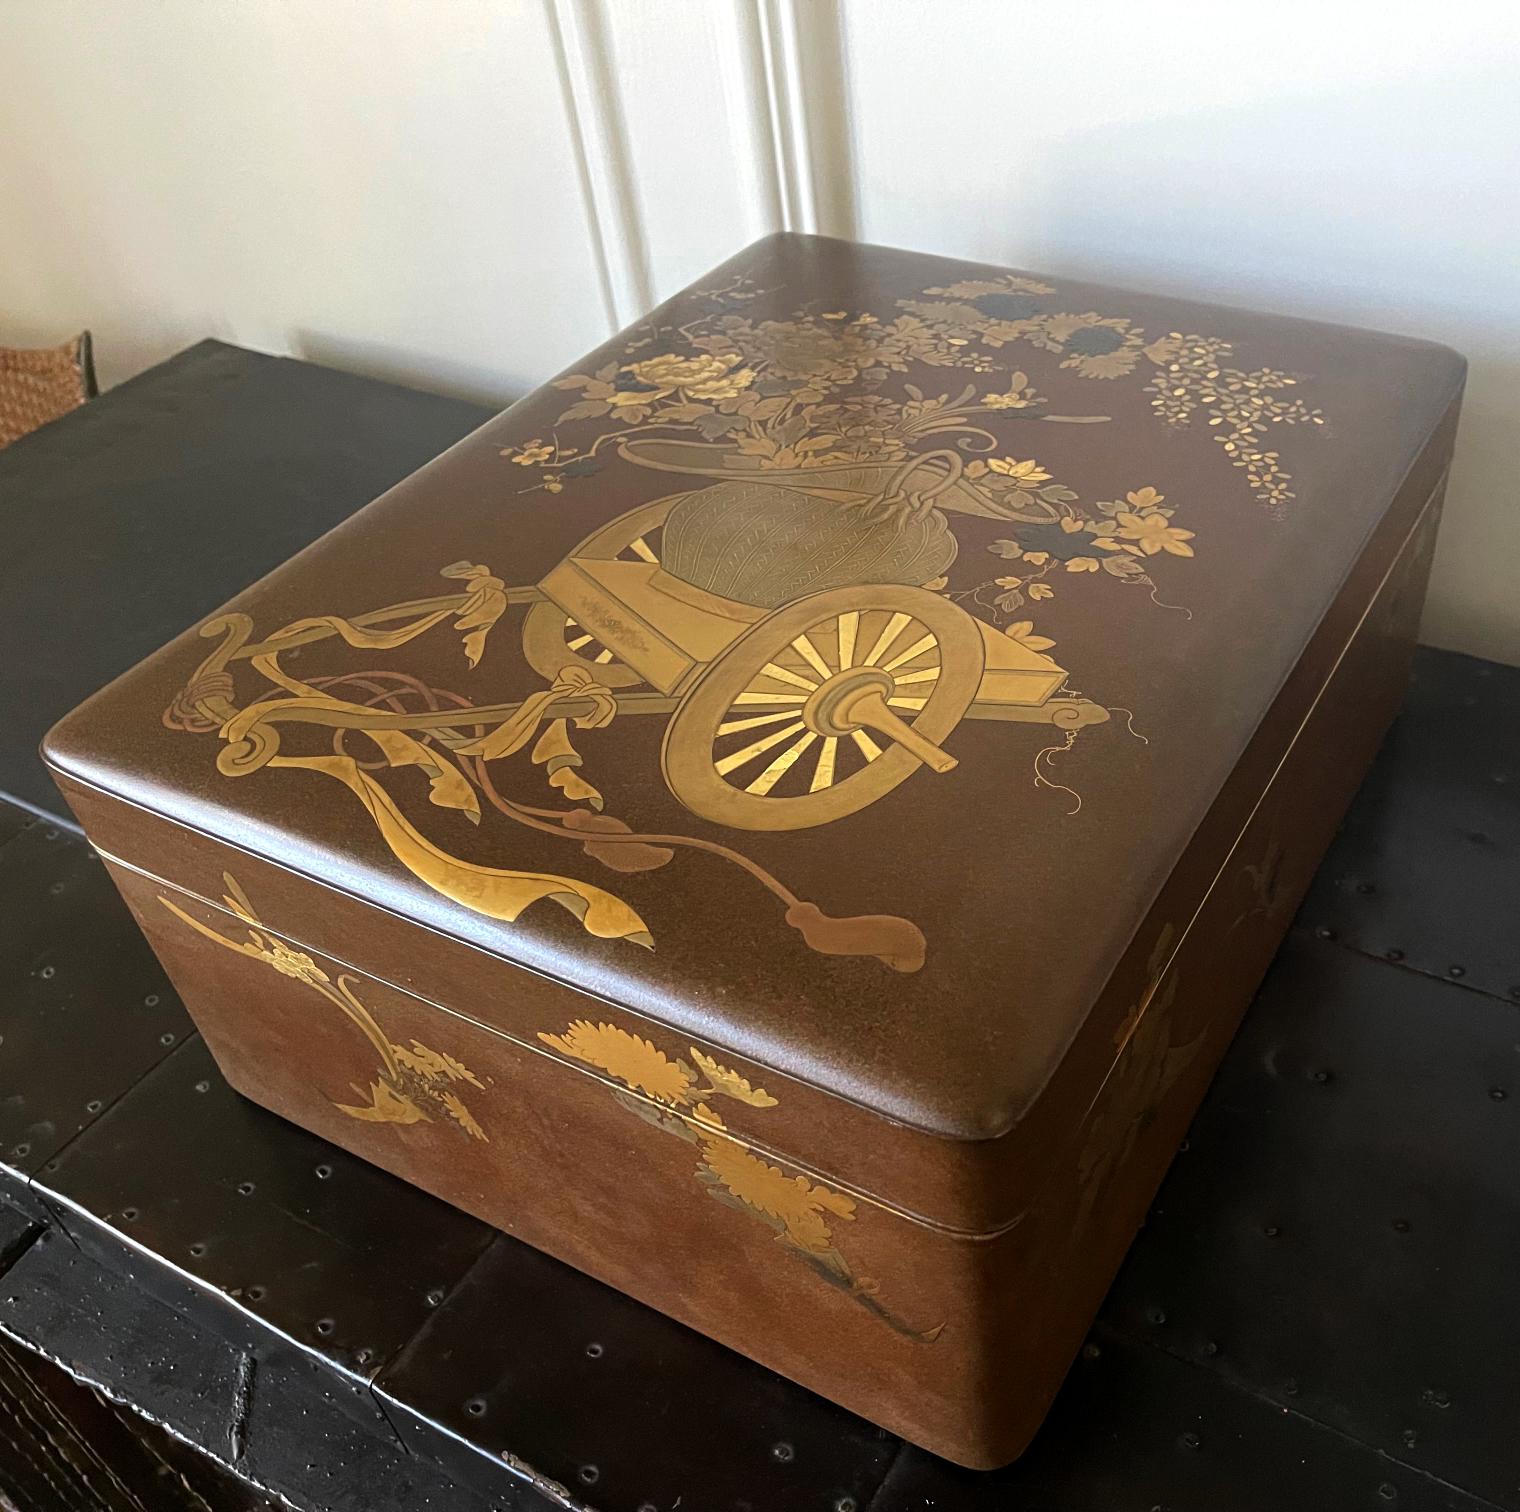 A large Japanese lacquer box with elaborate Maki-e design from Meiji period, (mid-late 19th century). The generous size of the box was reserved for paper document and called Ryoshibako in Japanese. The cover of the lid is decorated with a